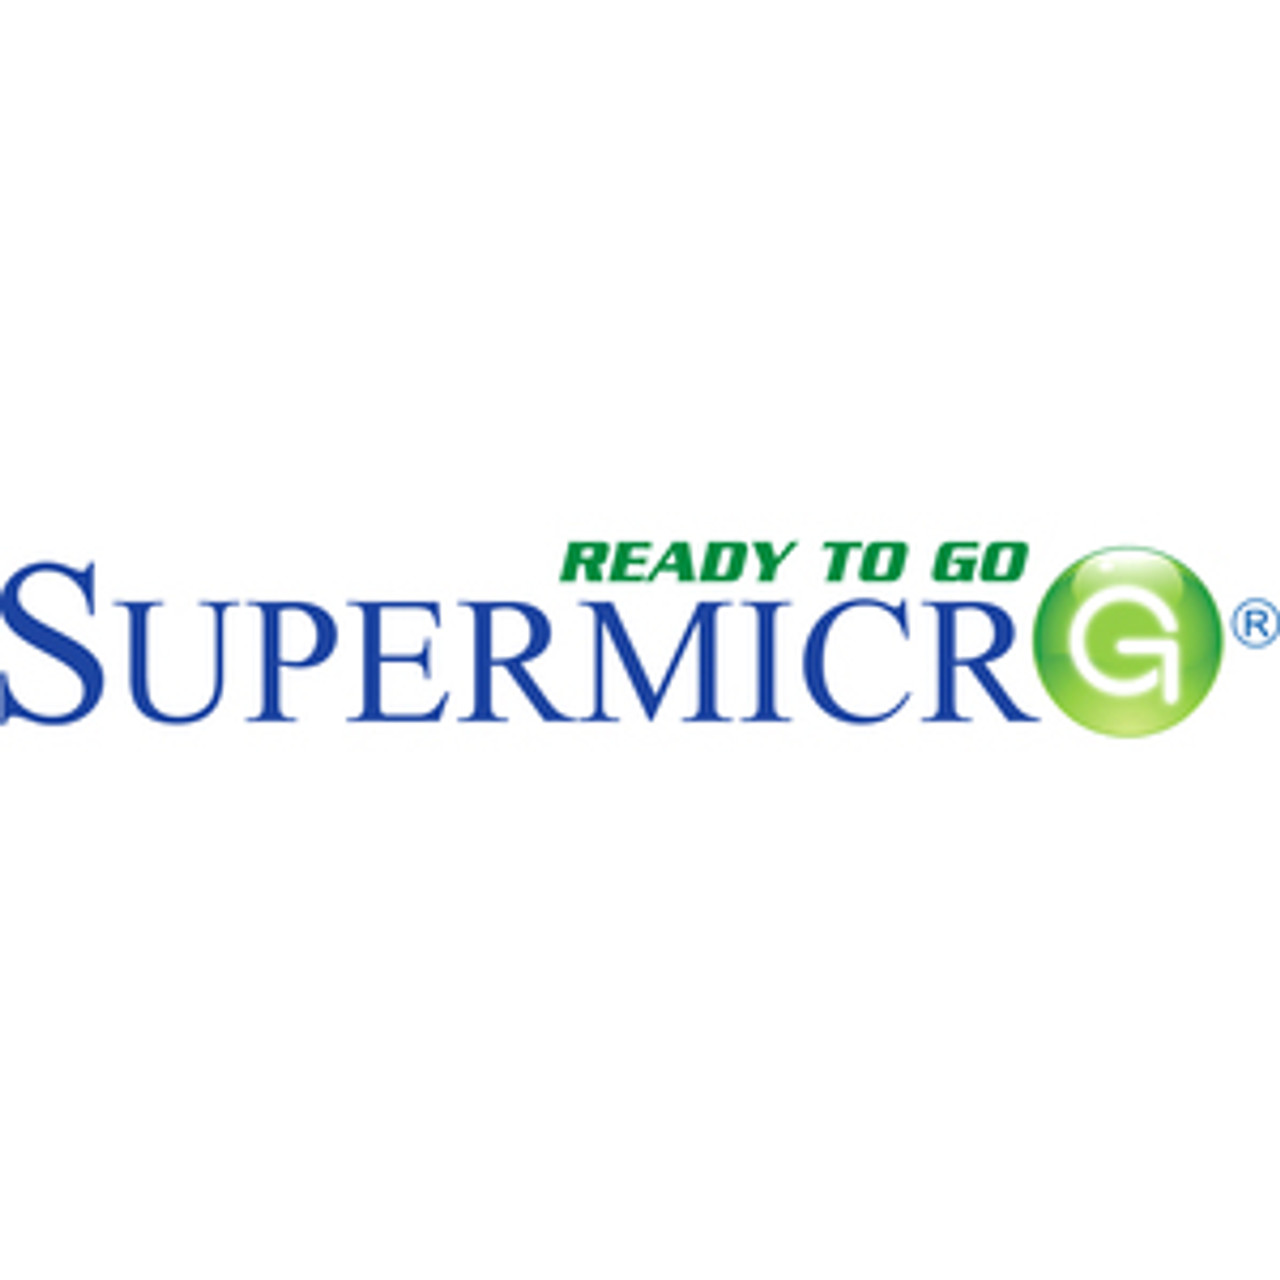 Supermicro 16 GB Solid State Drive - Disk-on-a-module (DOM) Internal - SATA